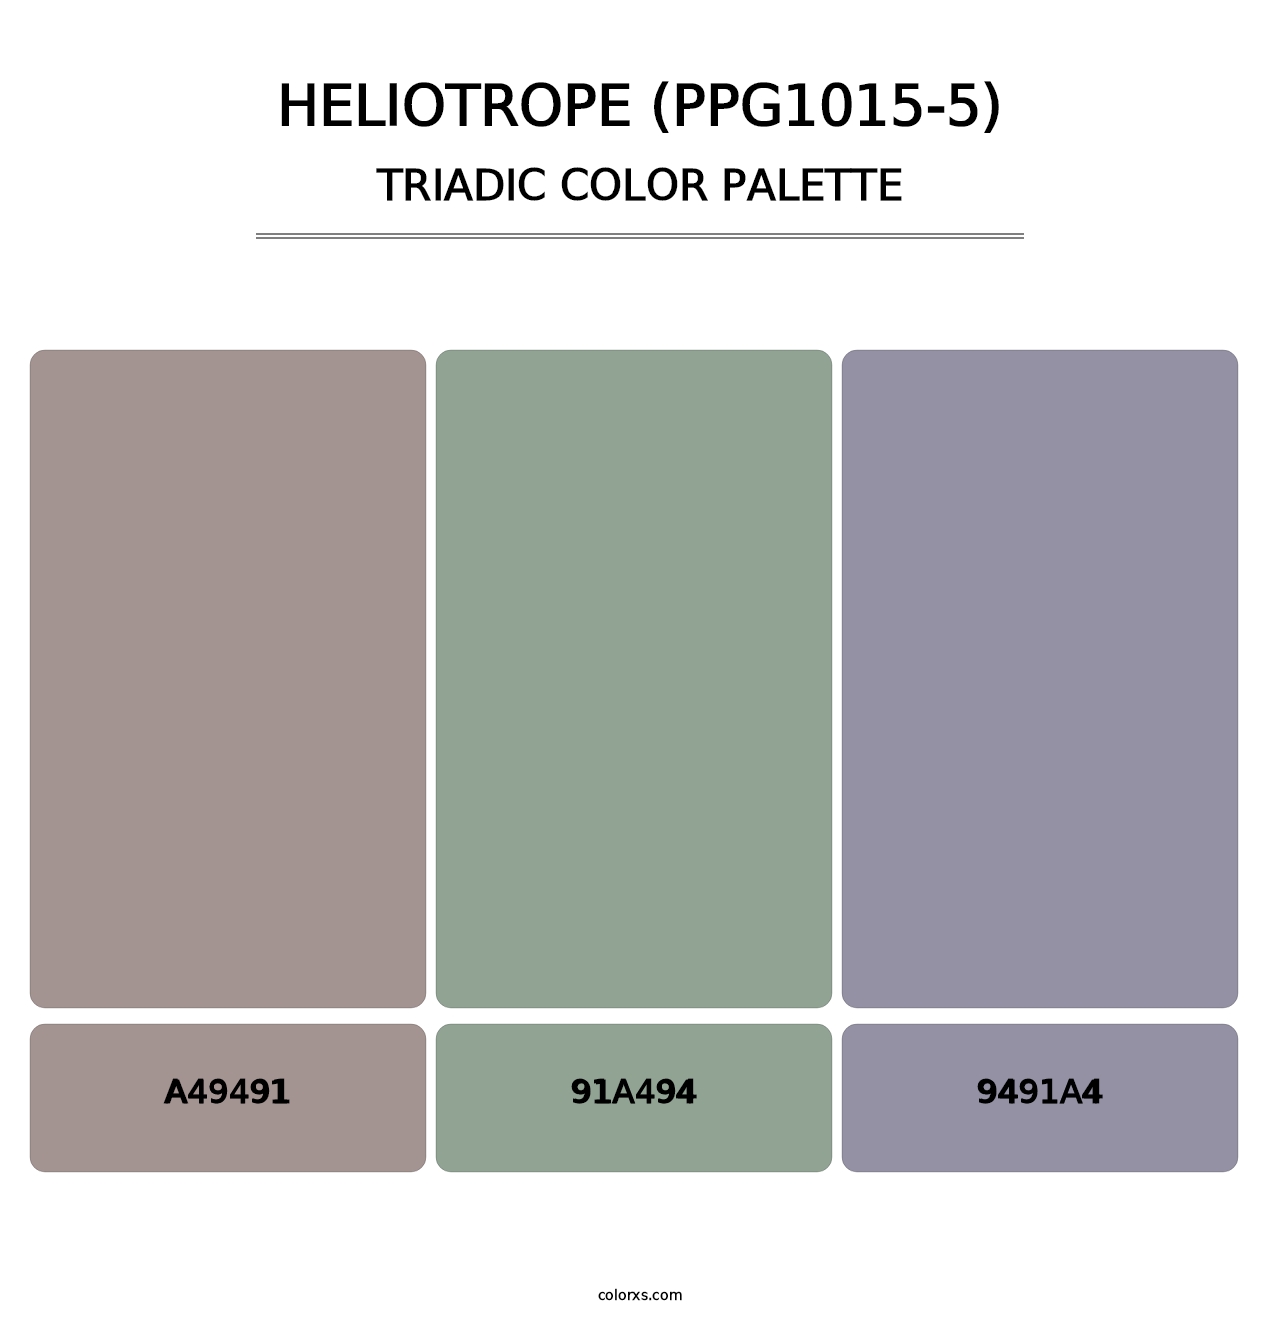 Heliotrope (PPG1015-5) - Triadic Color Palette